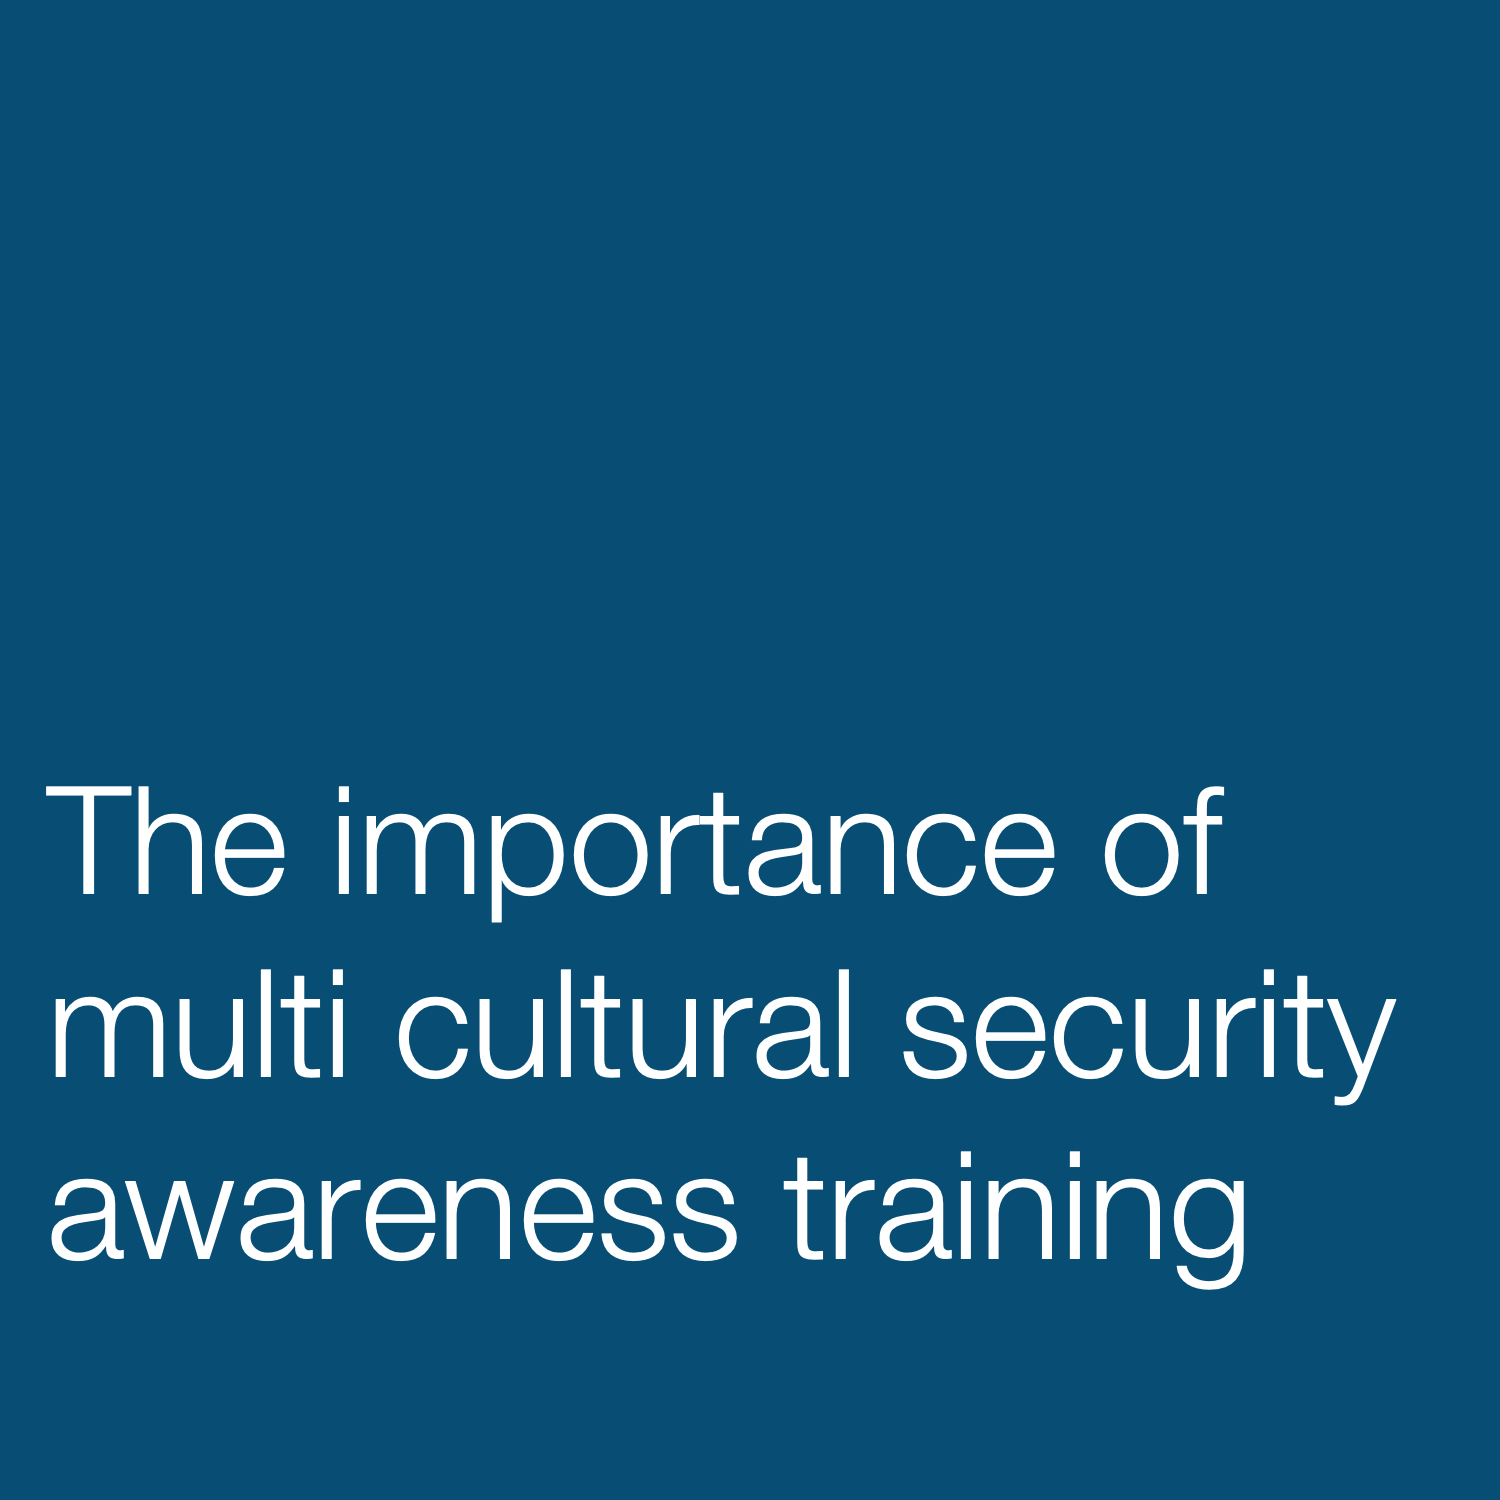 The importance of multi cultural security awareness training